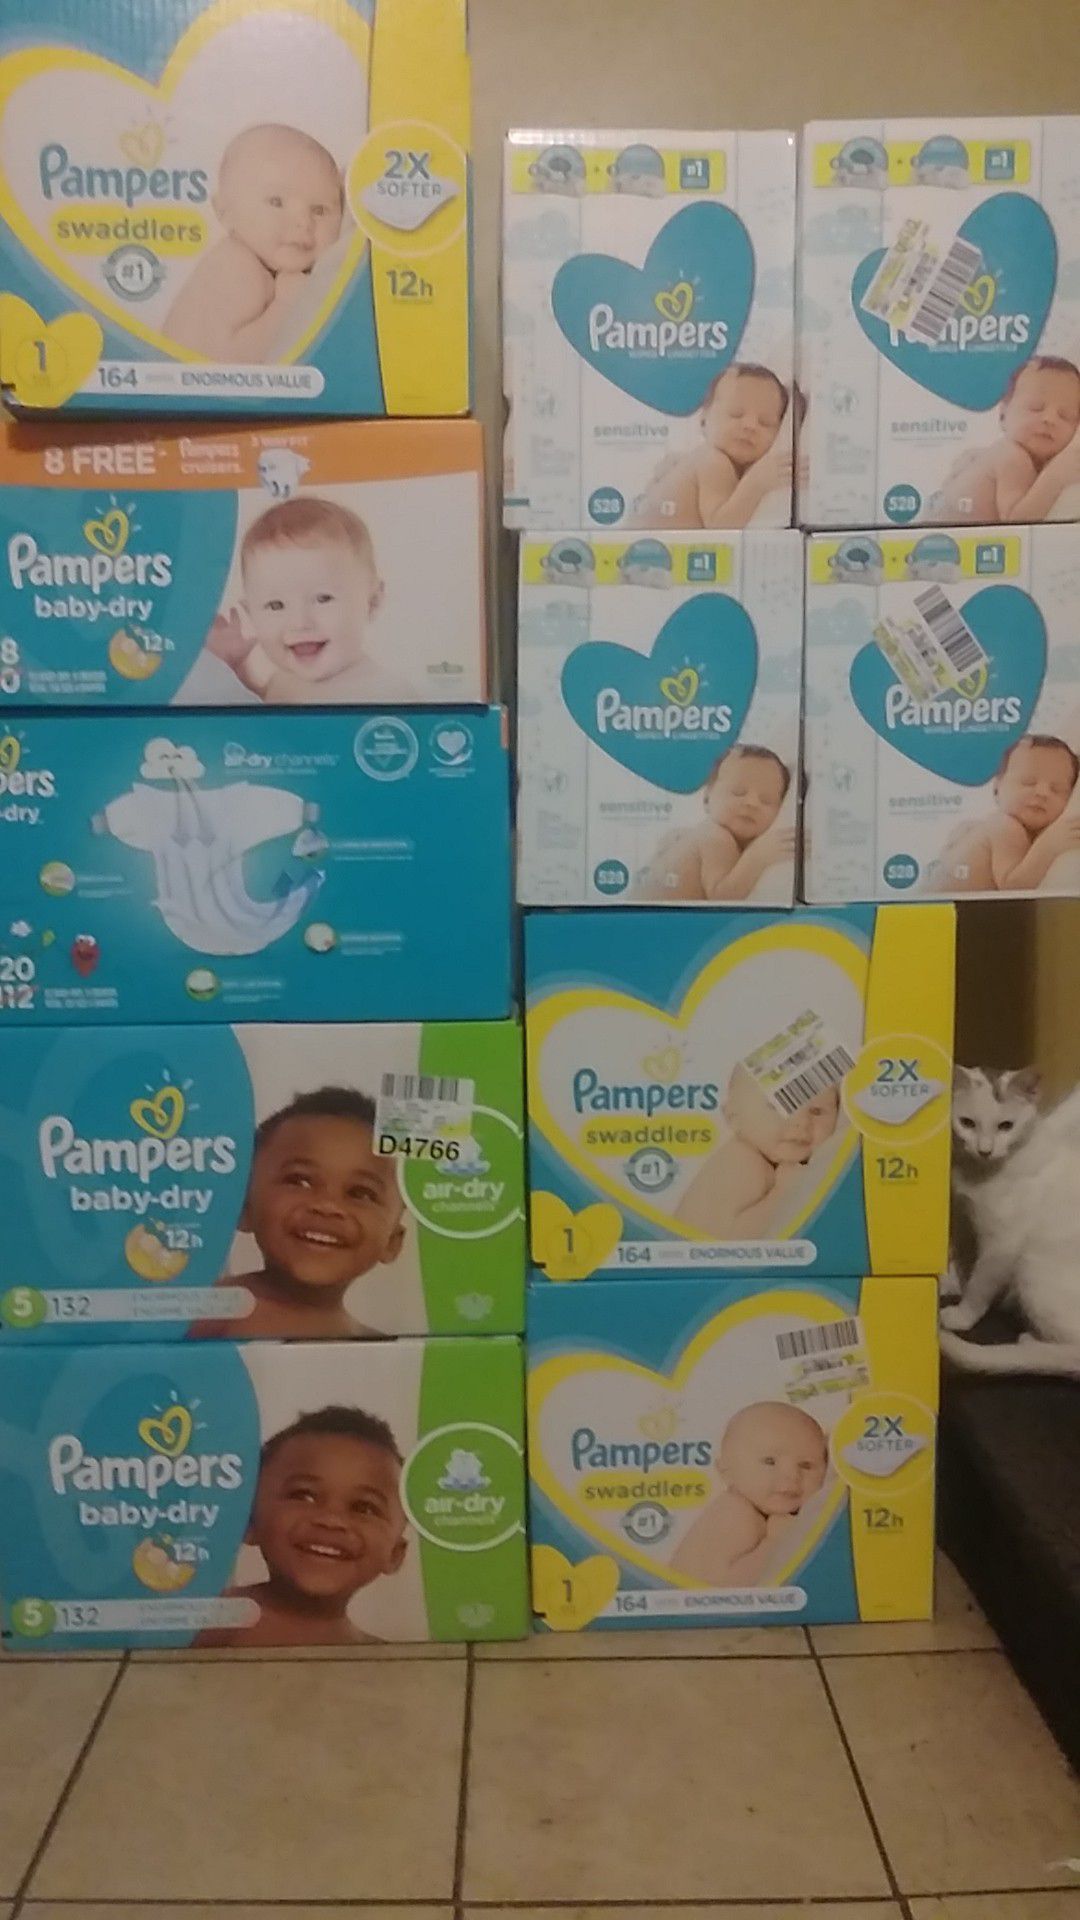 Pampers $20 a box and wipes are $7 a box